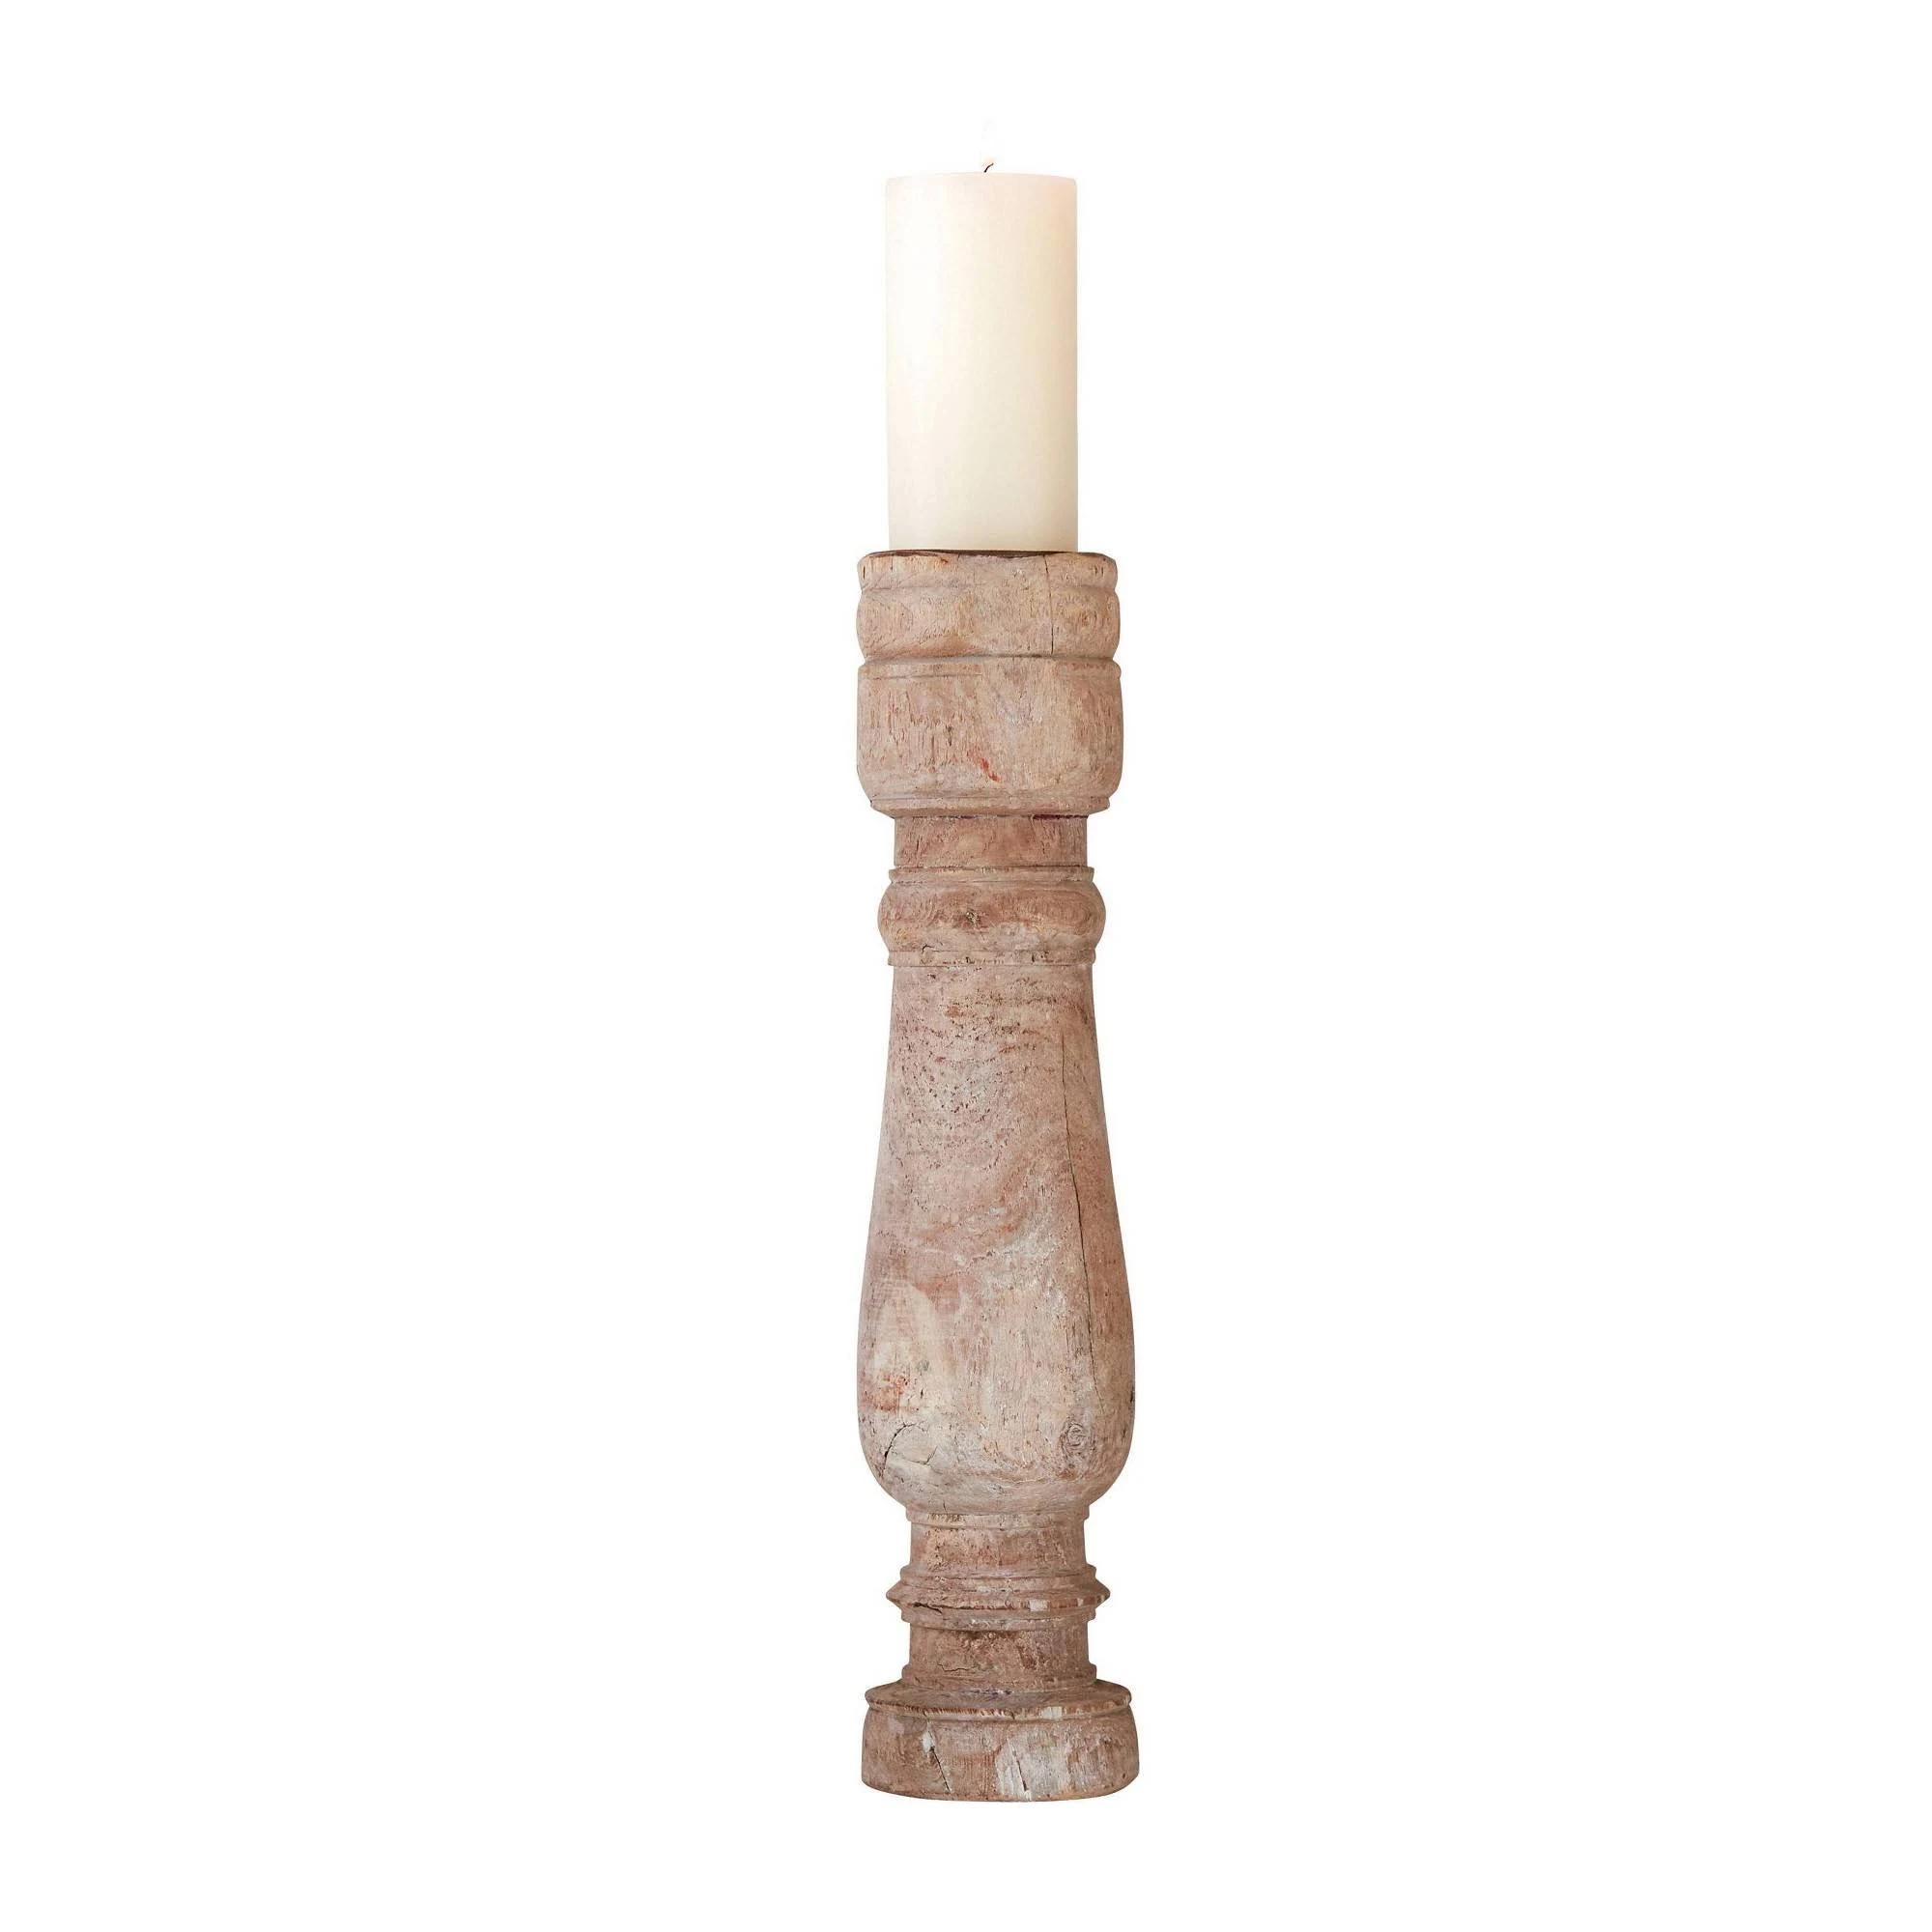 Kamiyah Found Candleholder (Includes 1 Candle Holder, Each One Will Vary) - Image 2